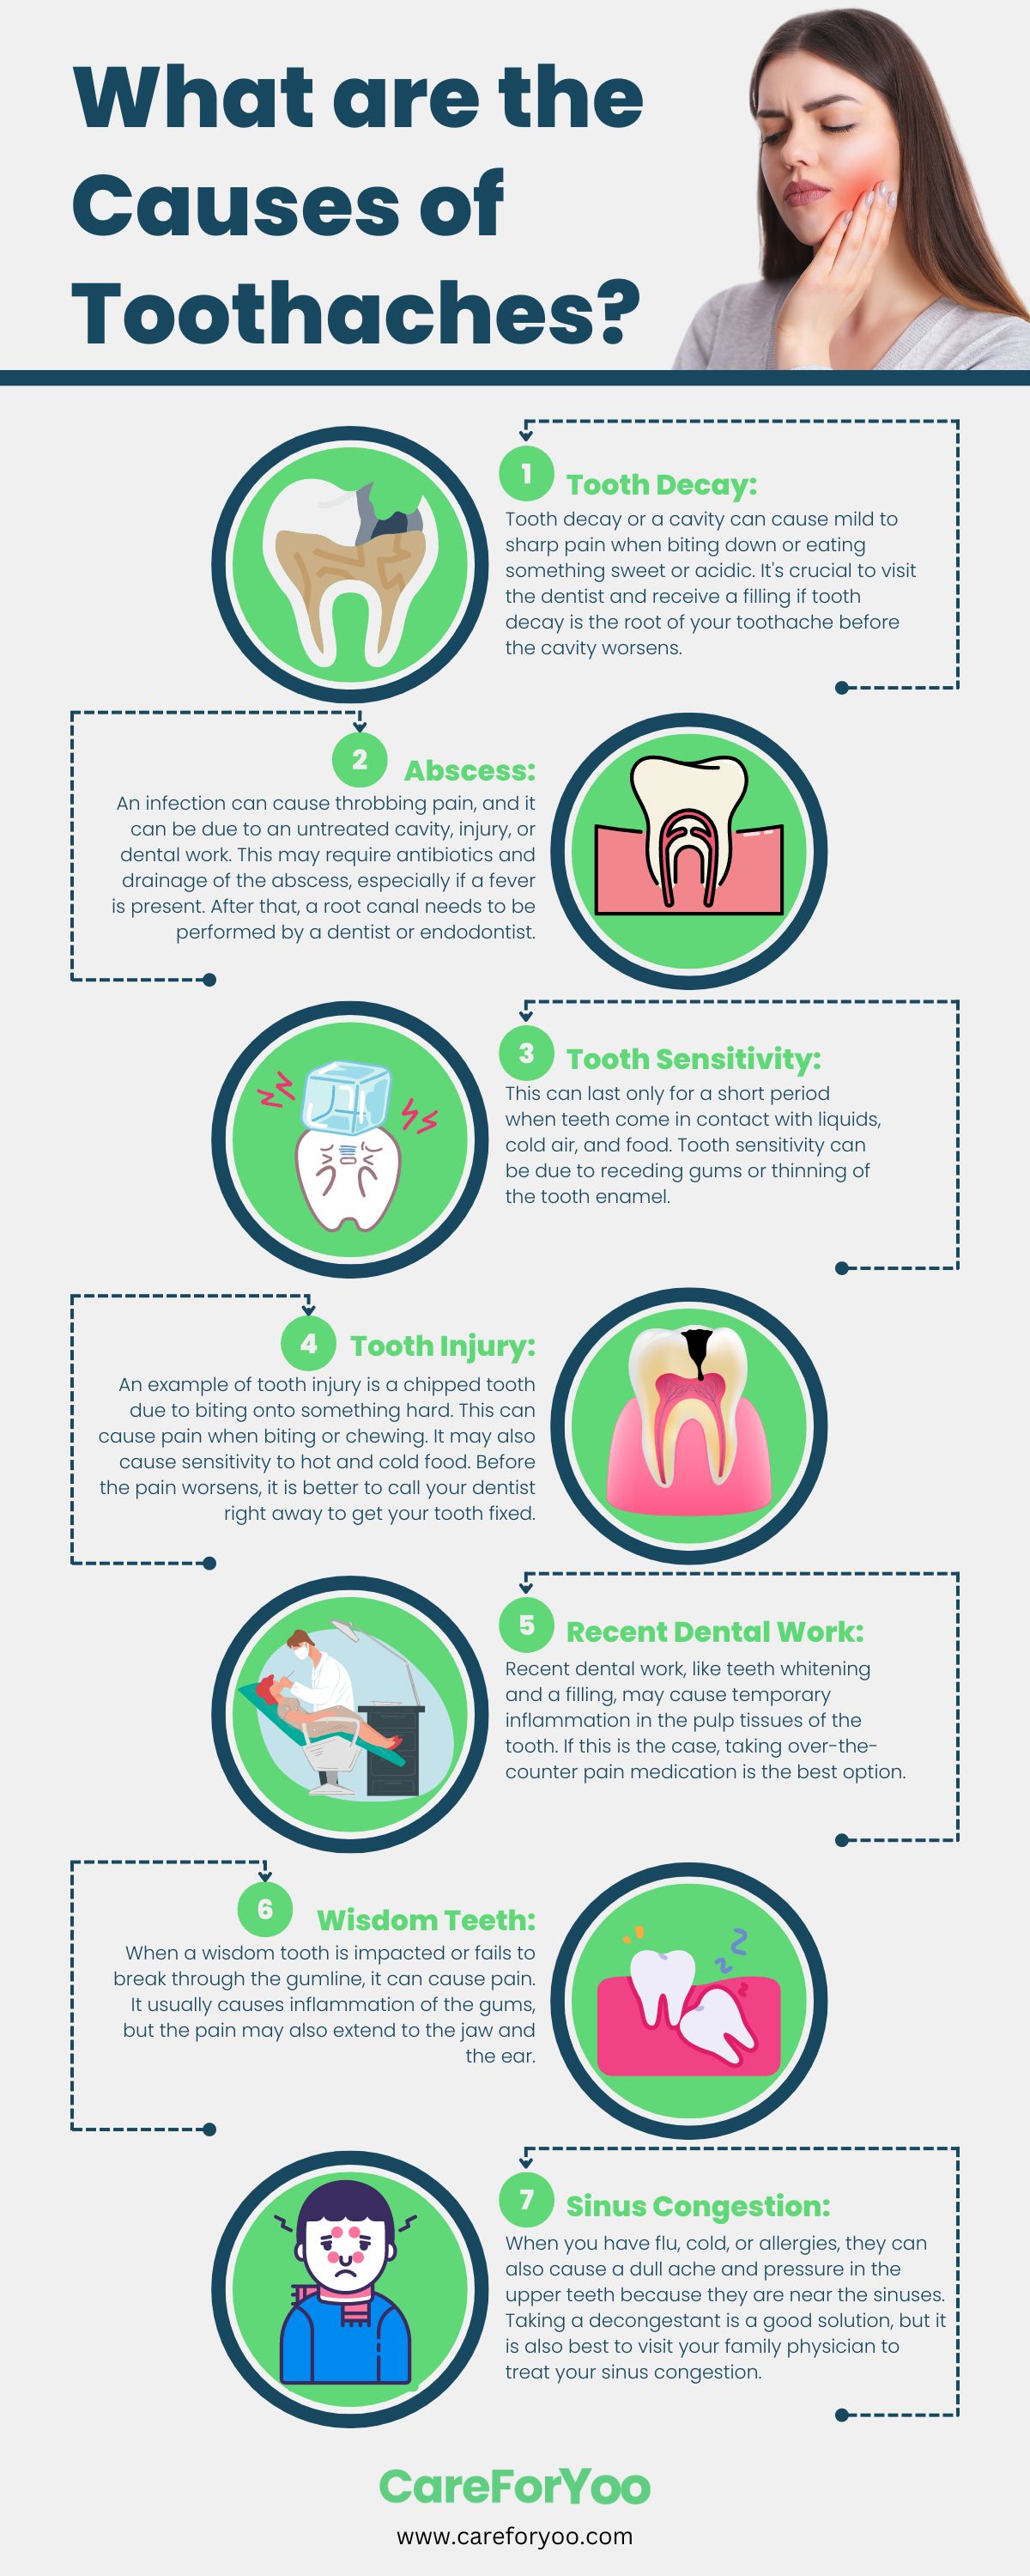 What are the Causes of Toothaches?